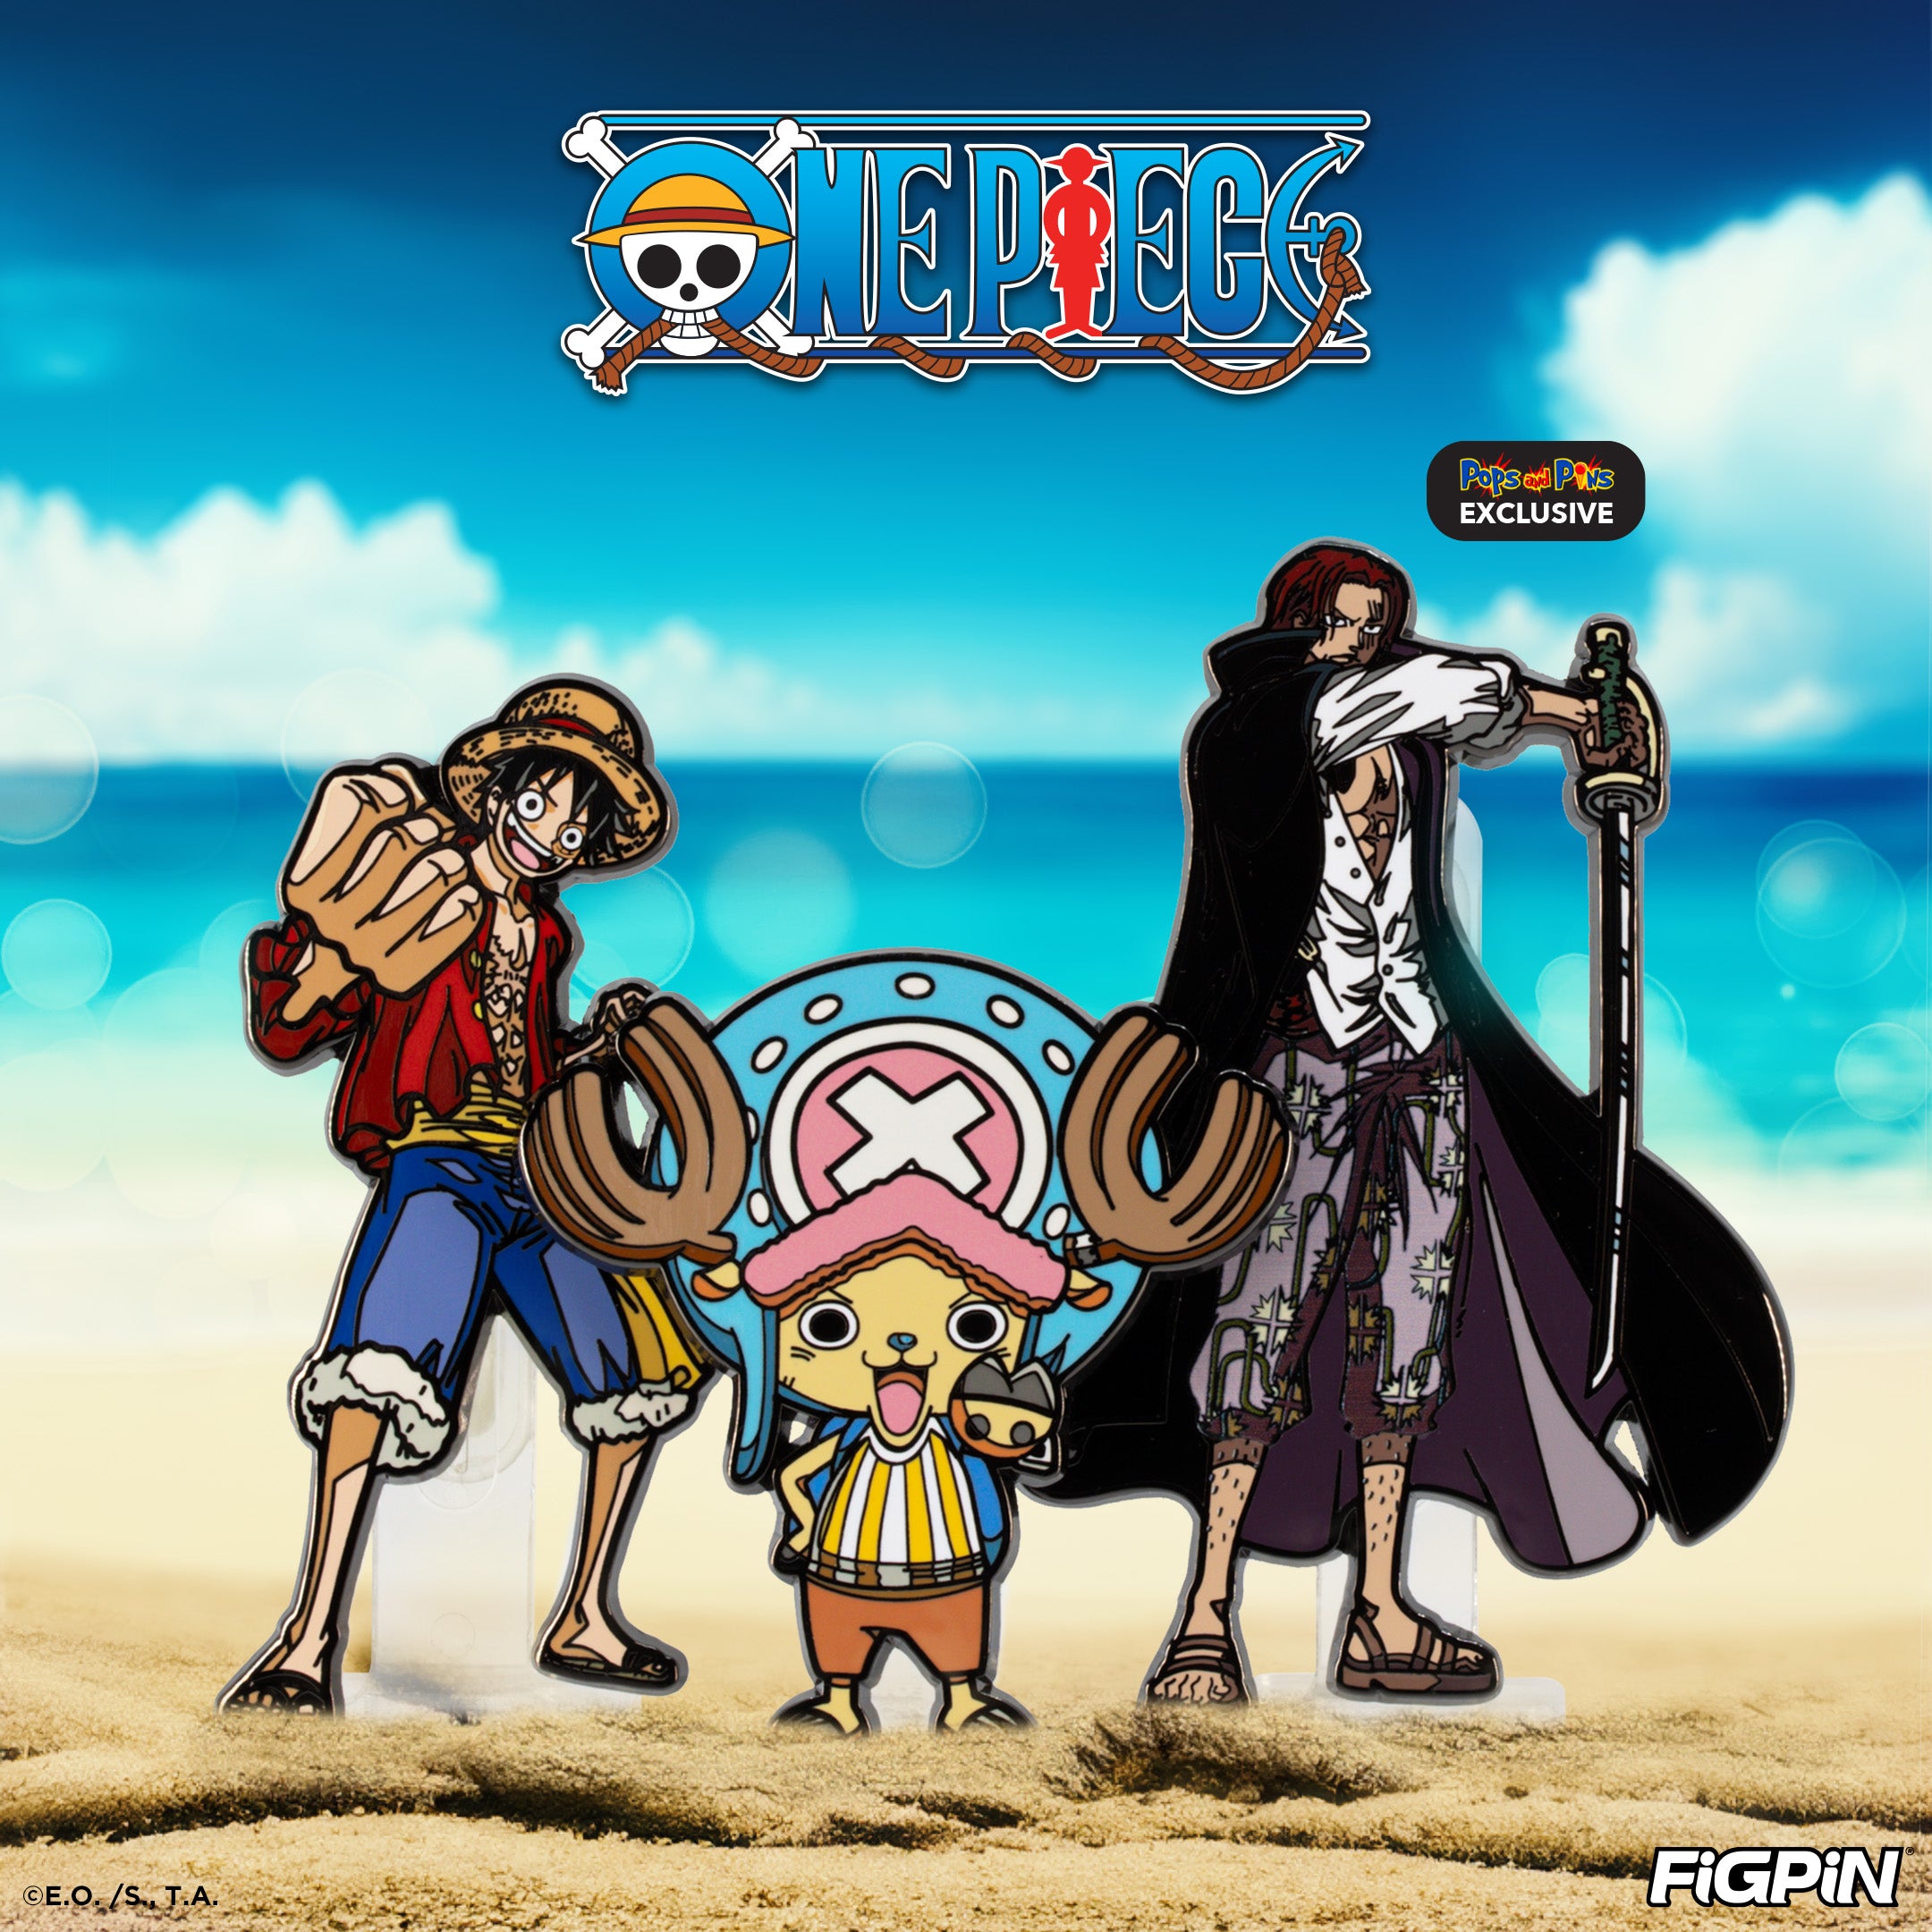 Photograph of One Piece characters available as enamel pins in this One Piece FiGPiN wave release